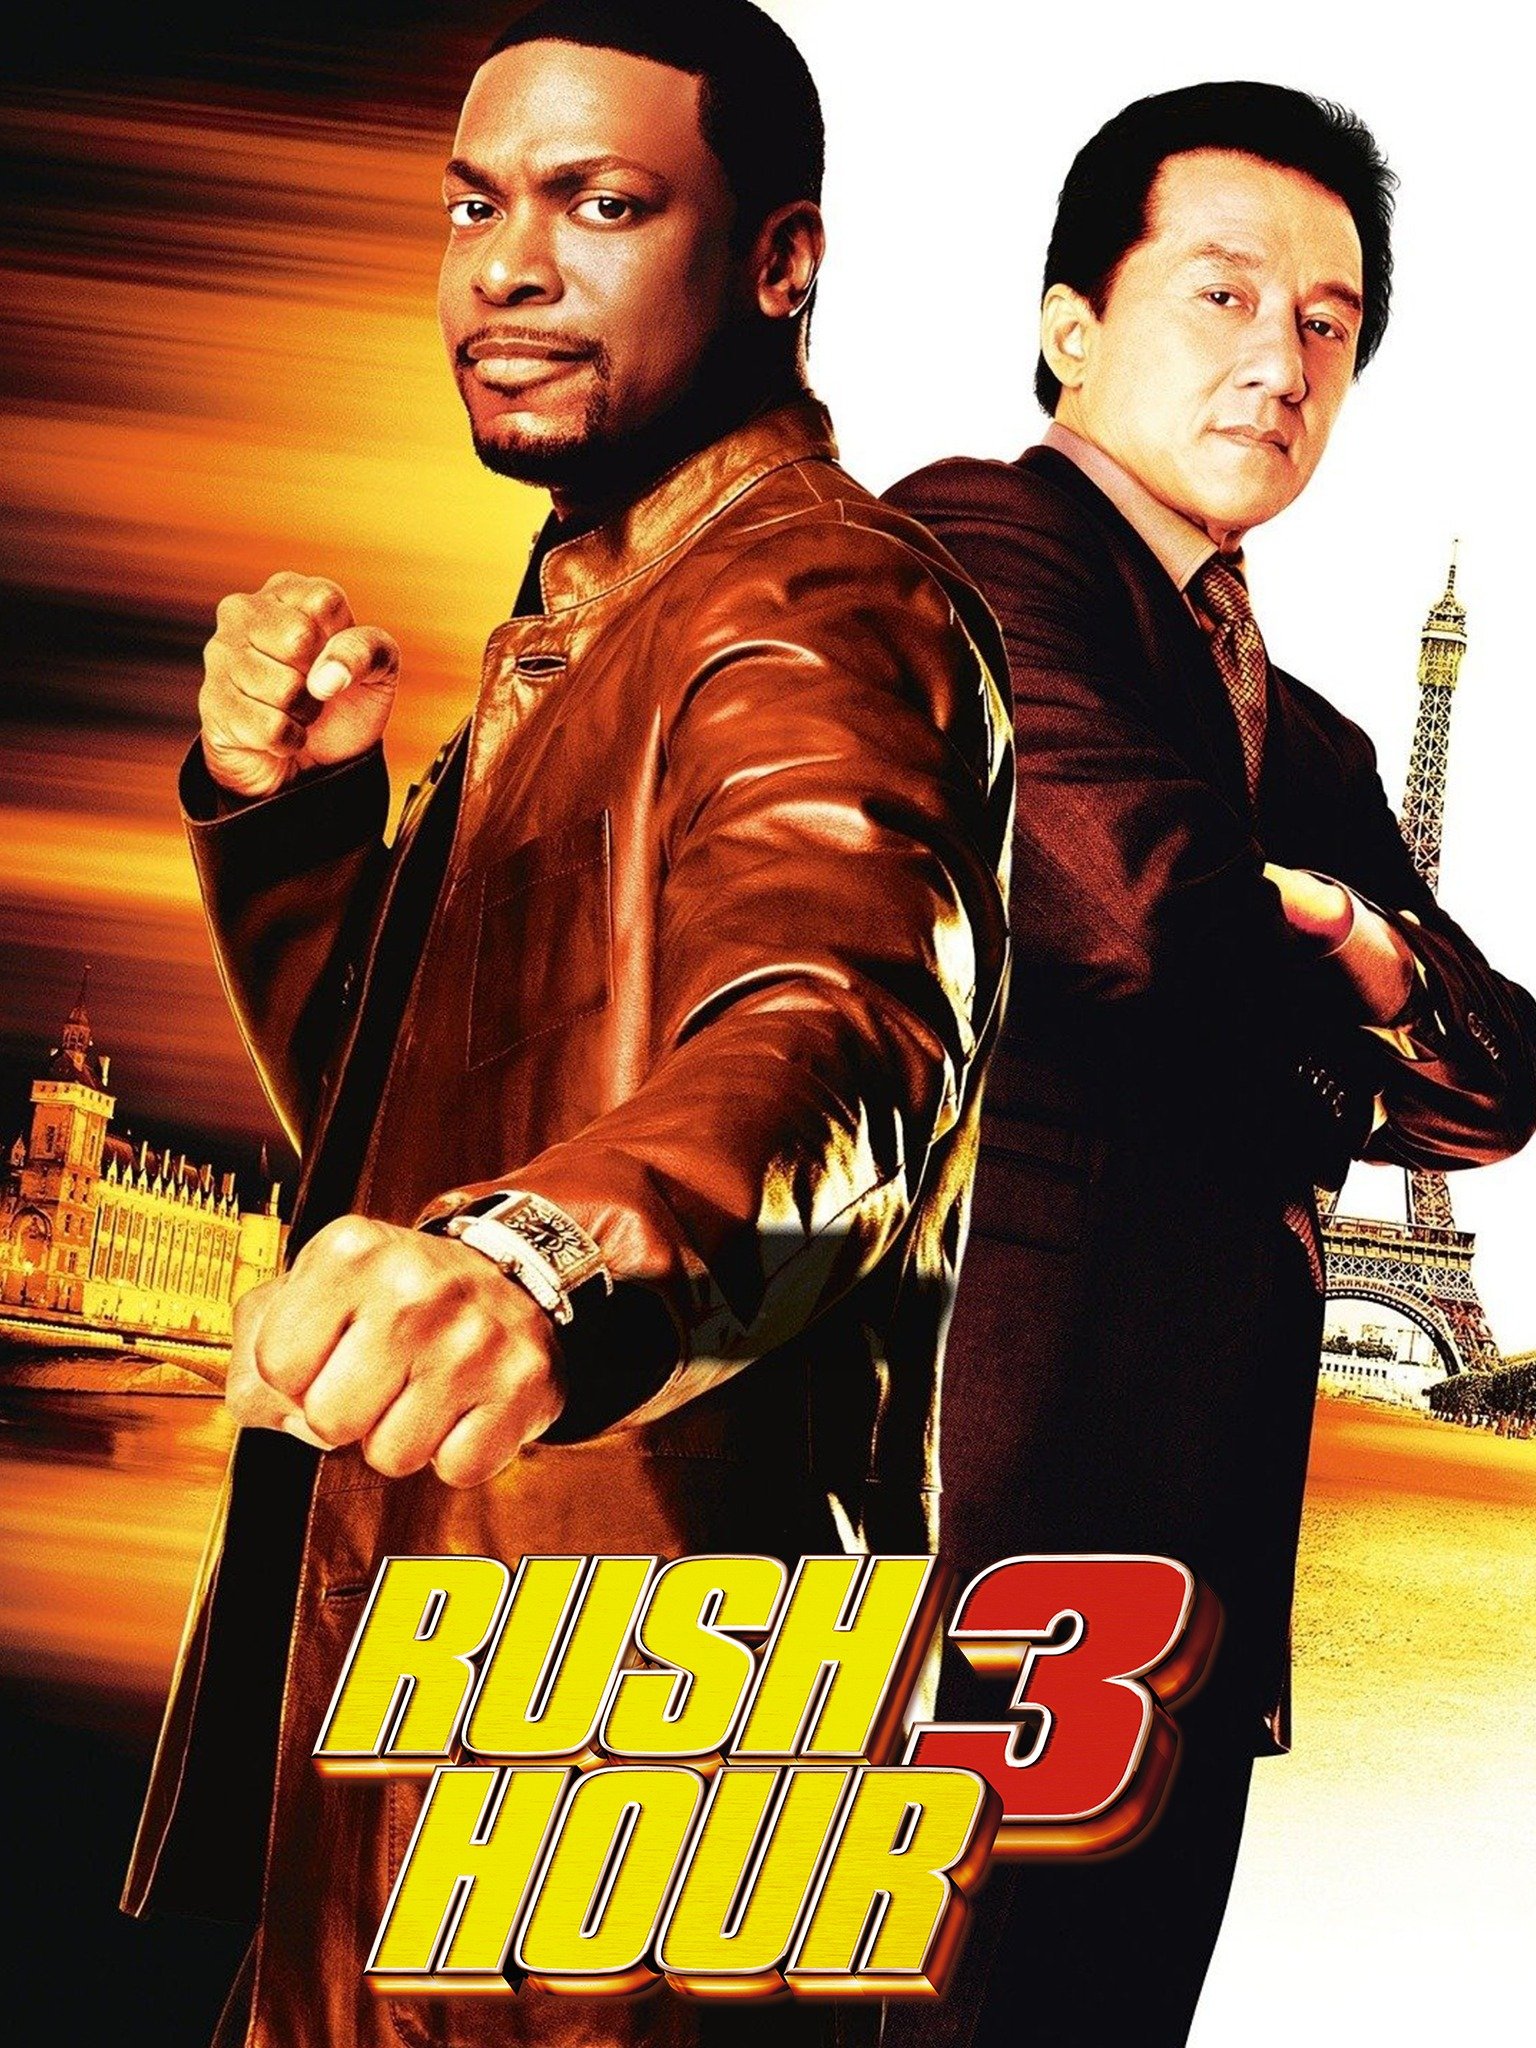 Rush Hour 3 Audience Reviews | MovieTickets